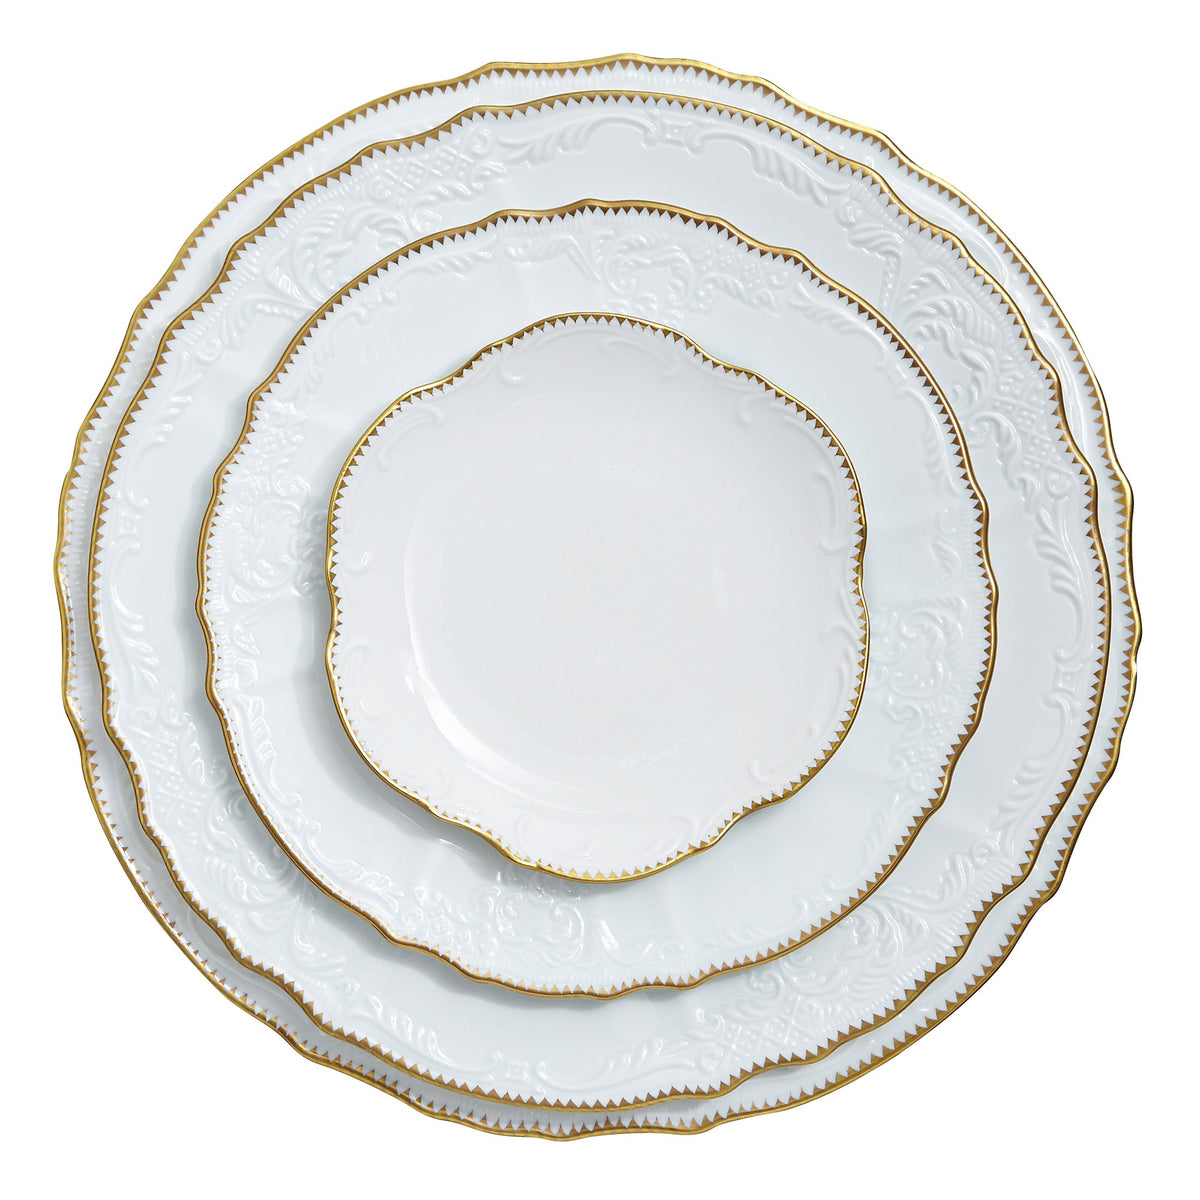 Simply Anna Charger Plate